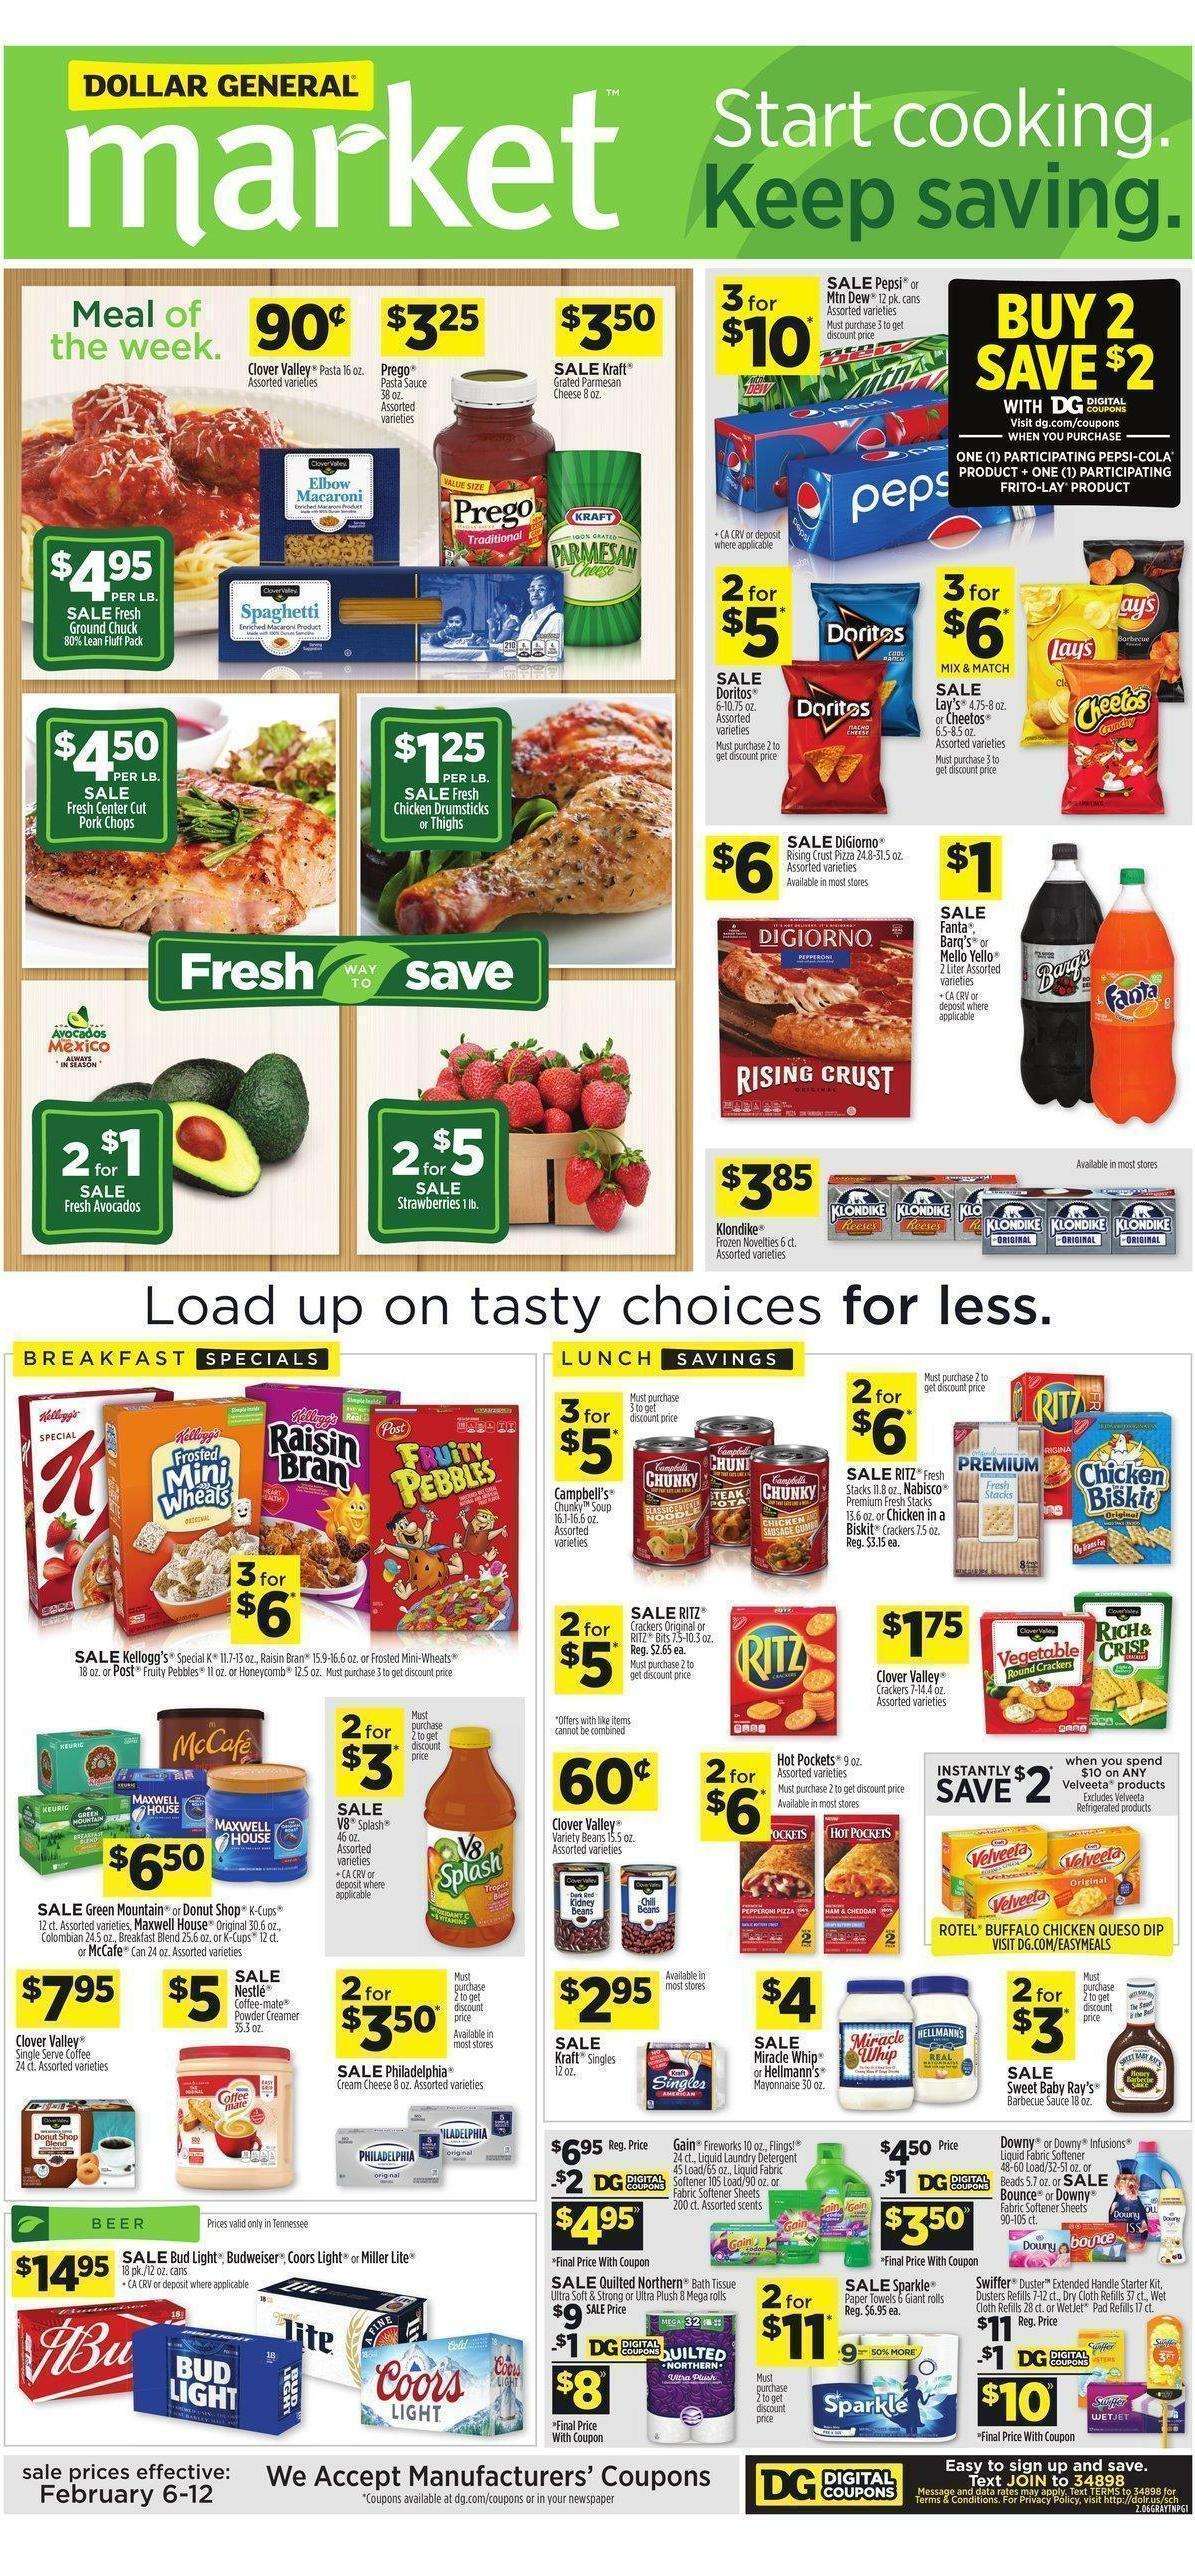 Dollar General Market Ad Weekly Ad from February 6